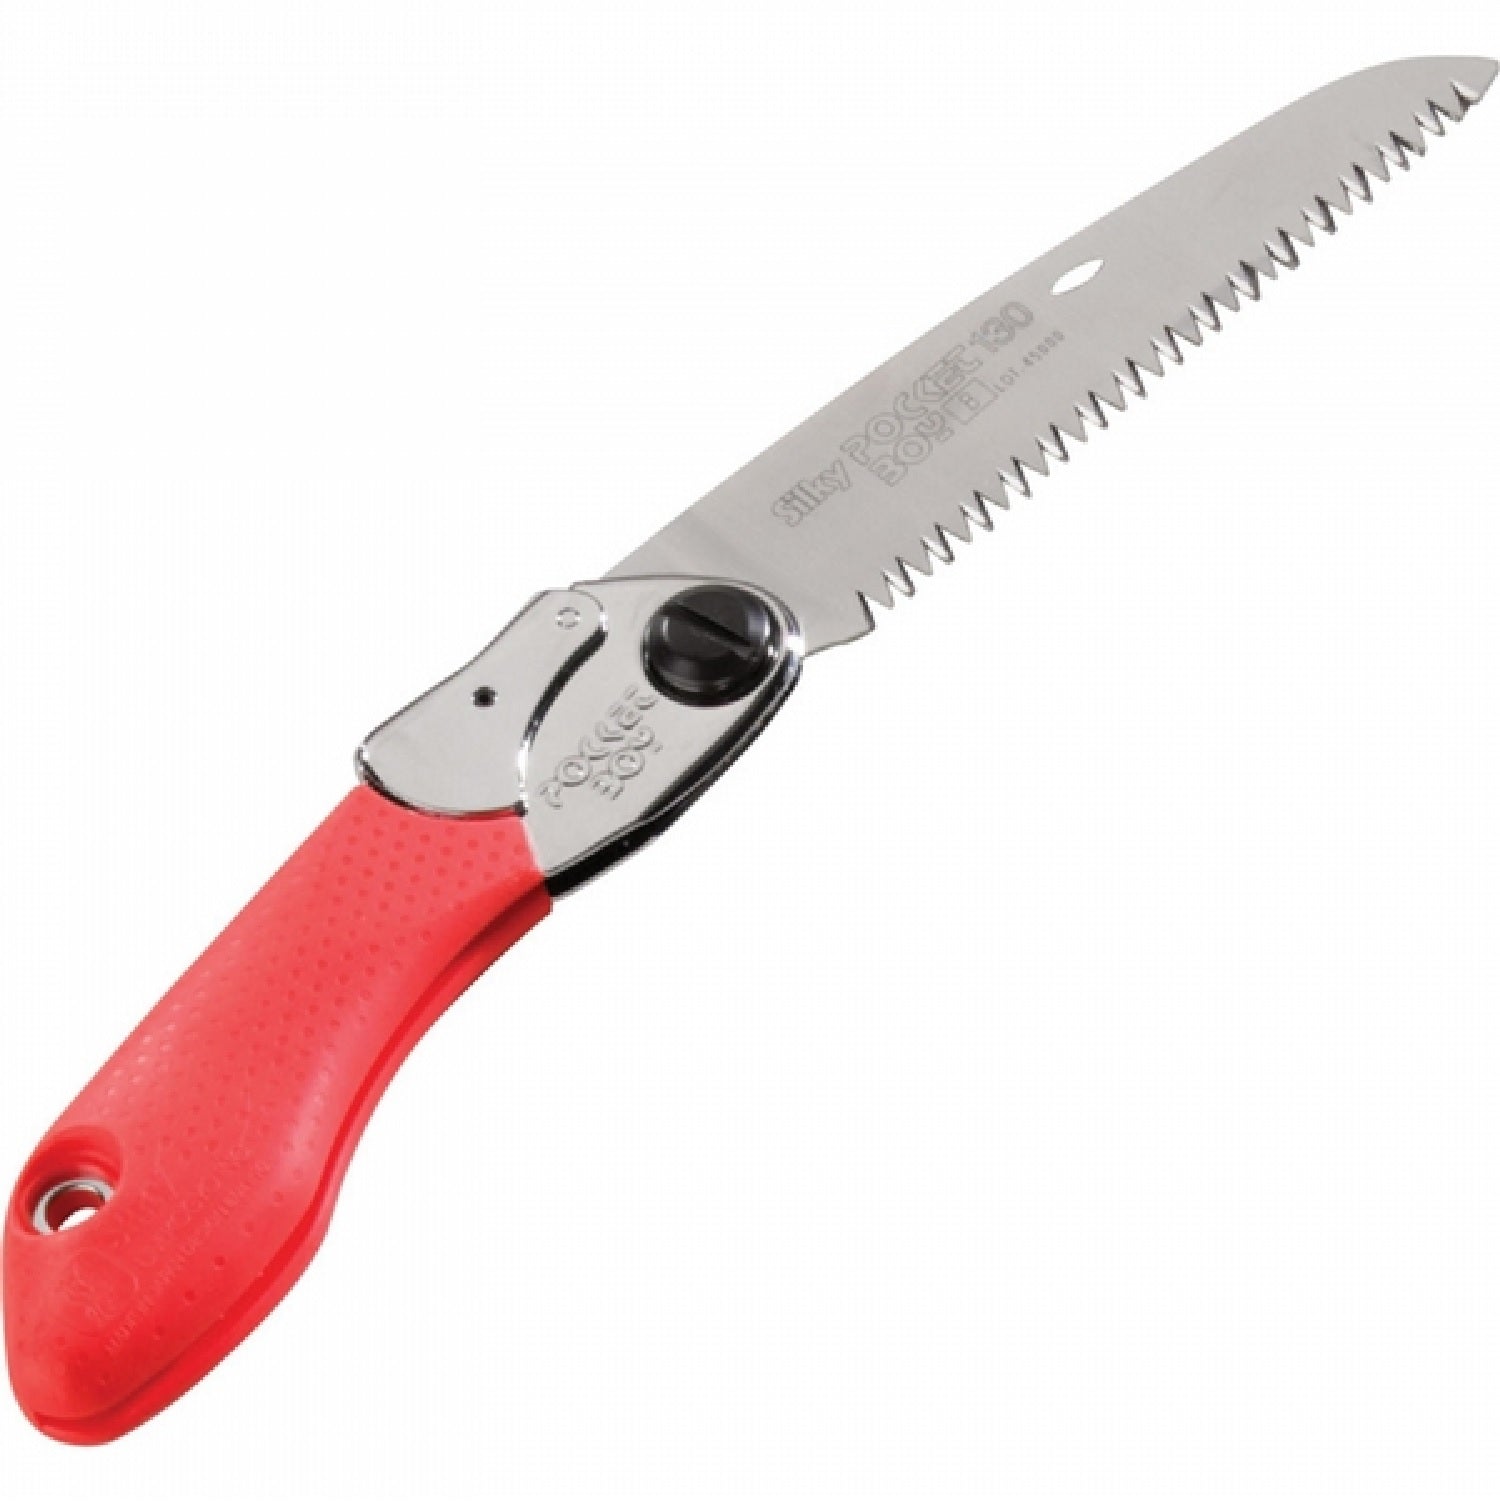 Silky Pocketboy Folding Saw 5.1 in Blade Large Tooth